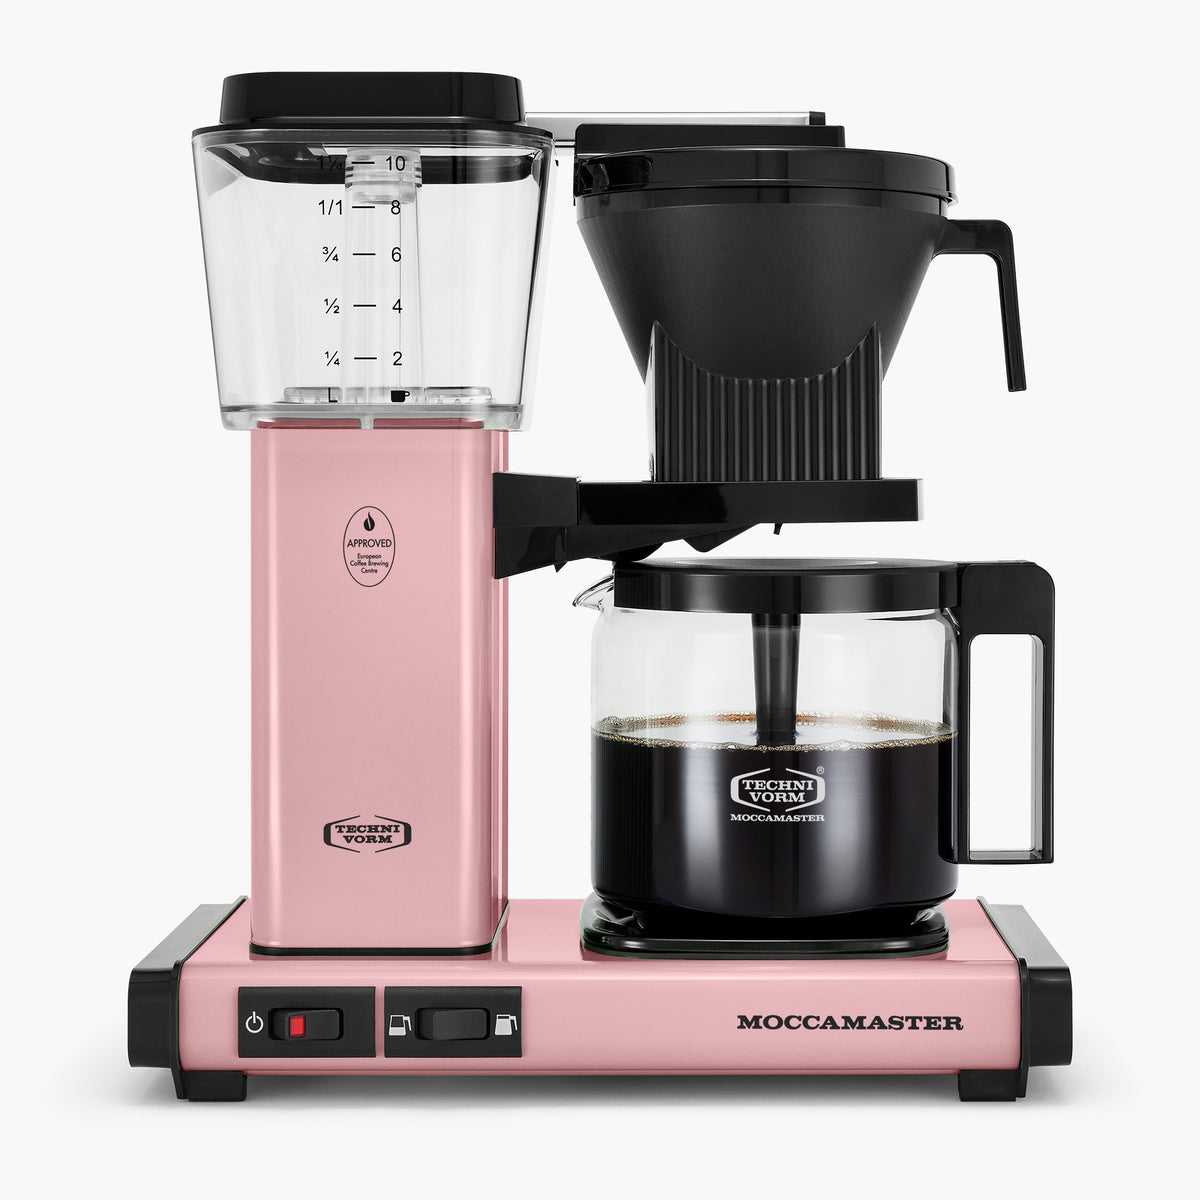 Pink Moccamaster coffee maker with a clear water reservoir, black brewing funnel, and glass carafe.